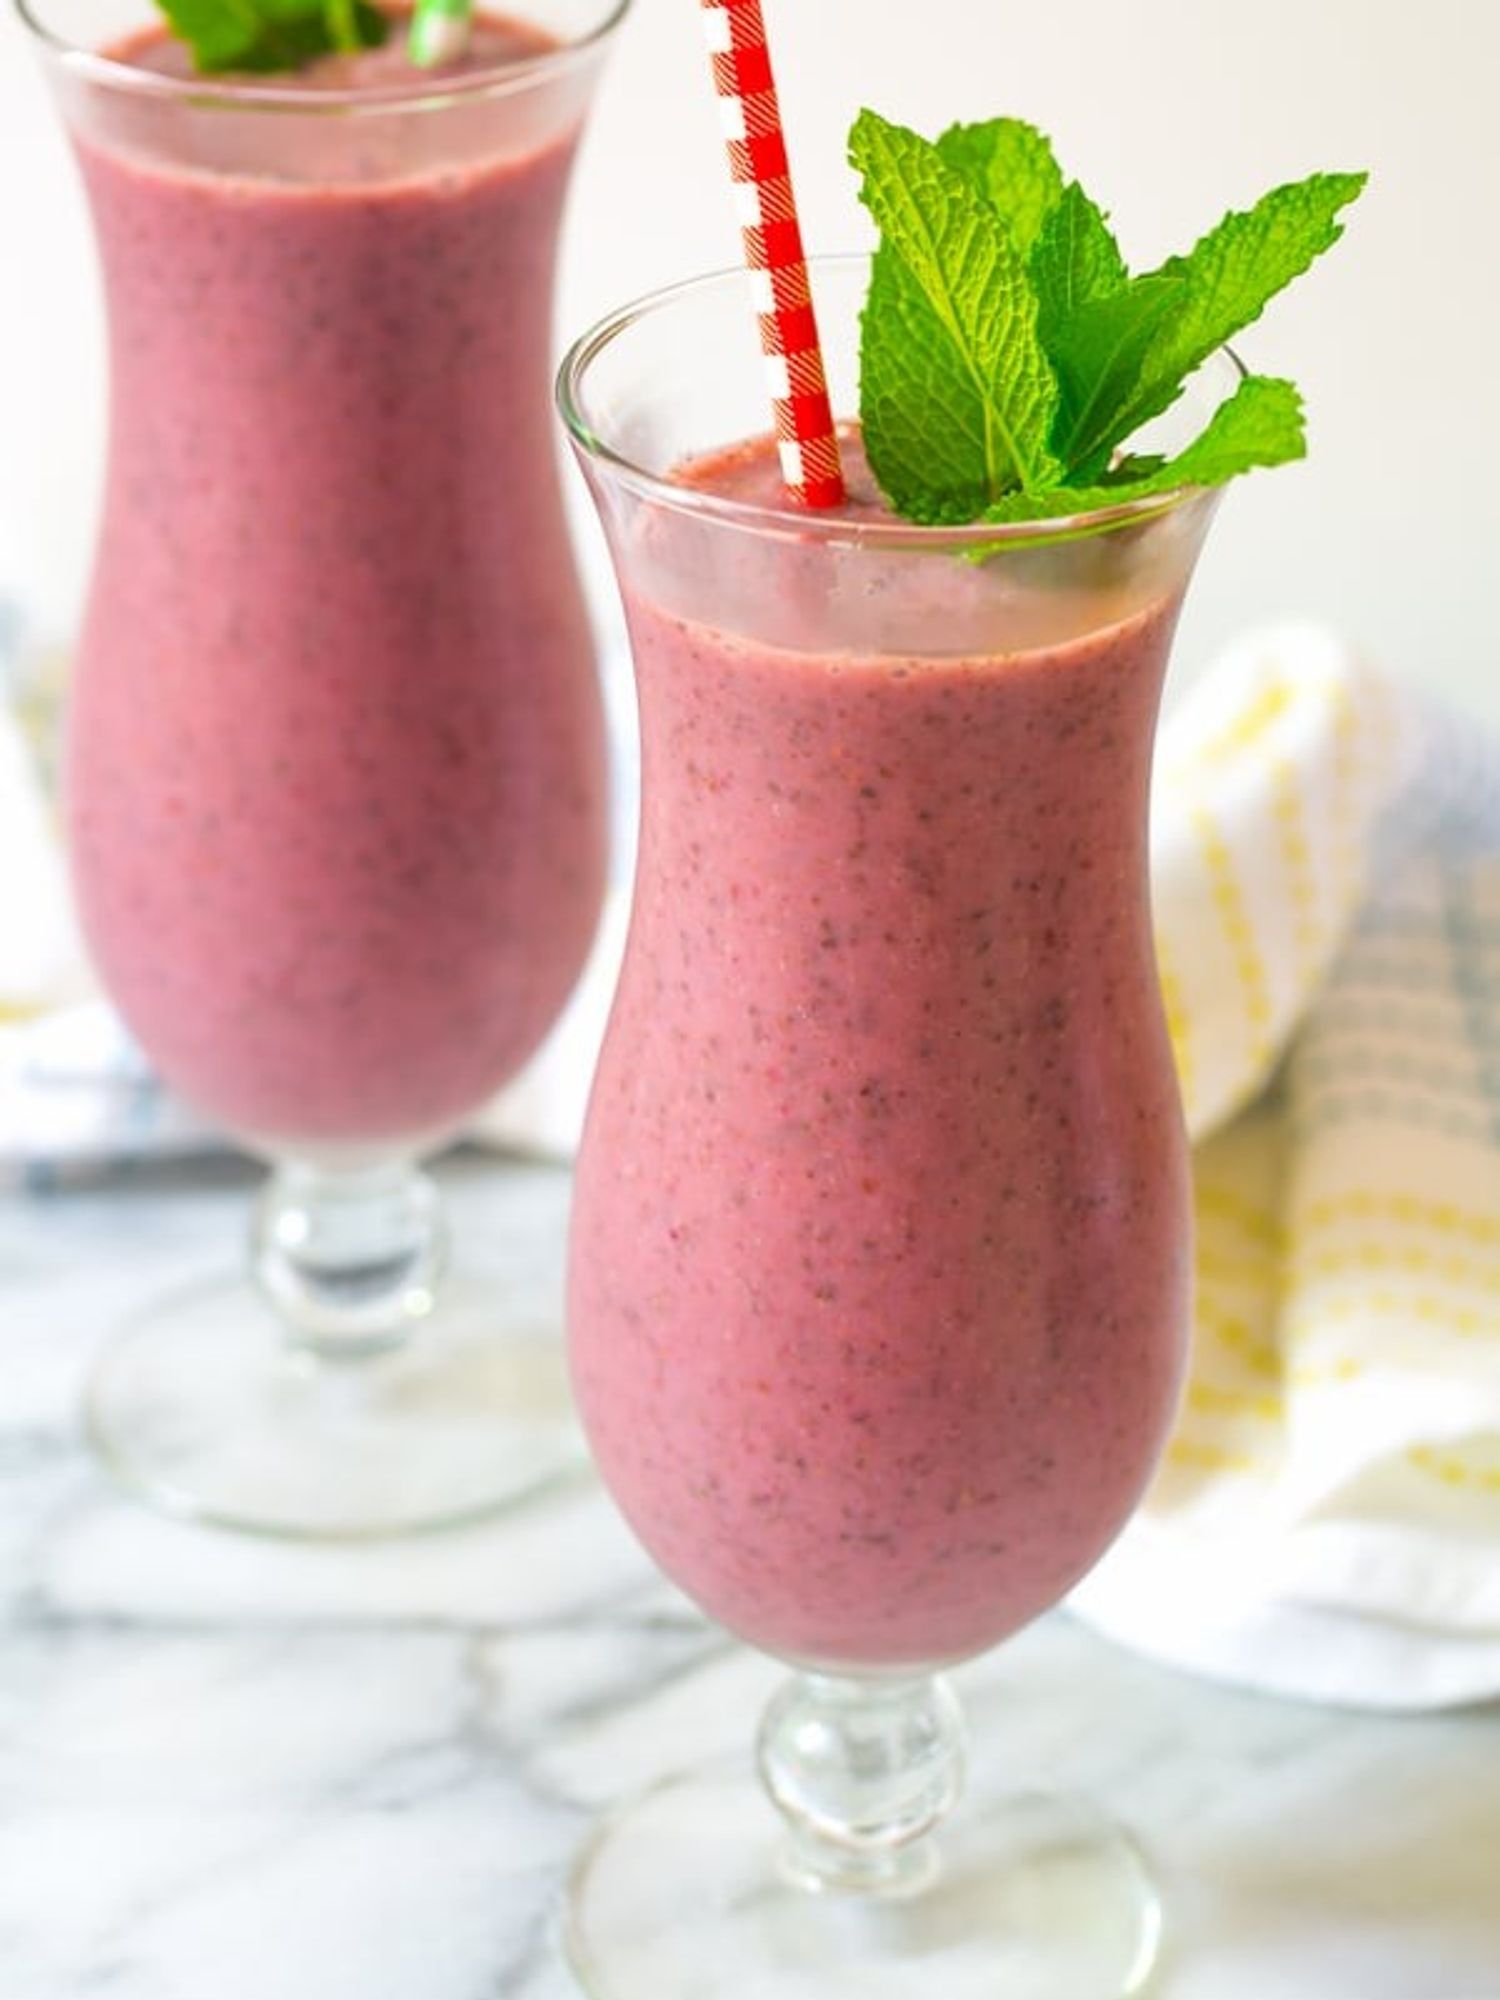 Strawberry Chocolate Mint Smoothies